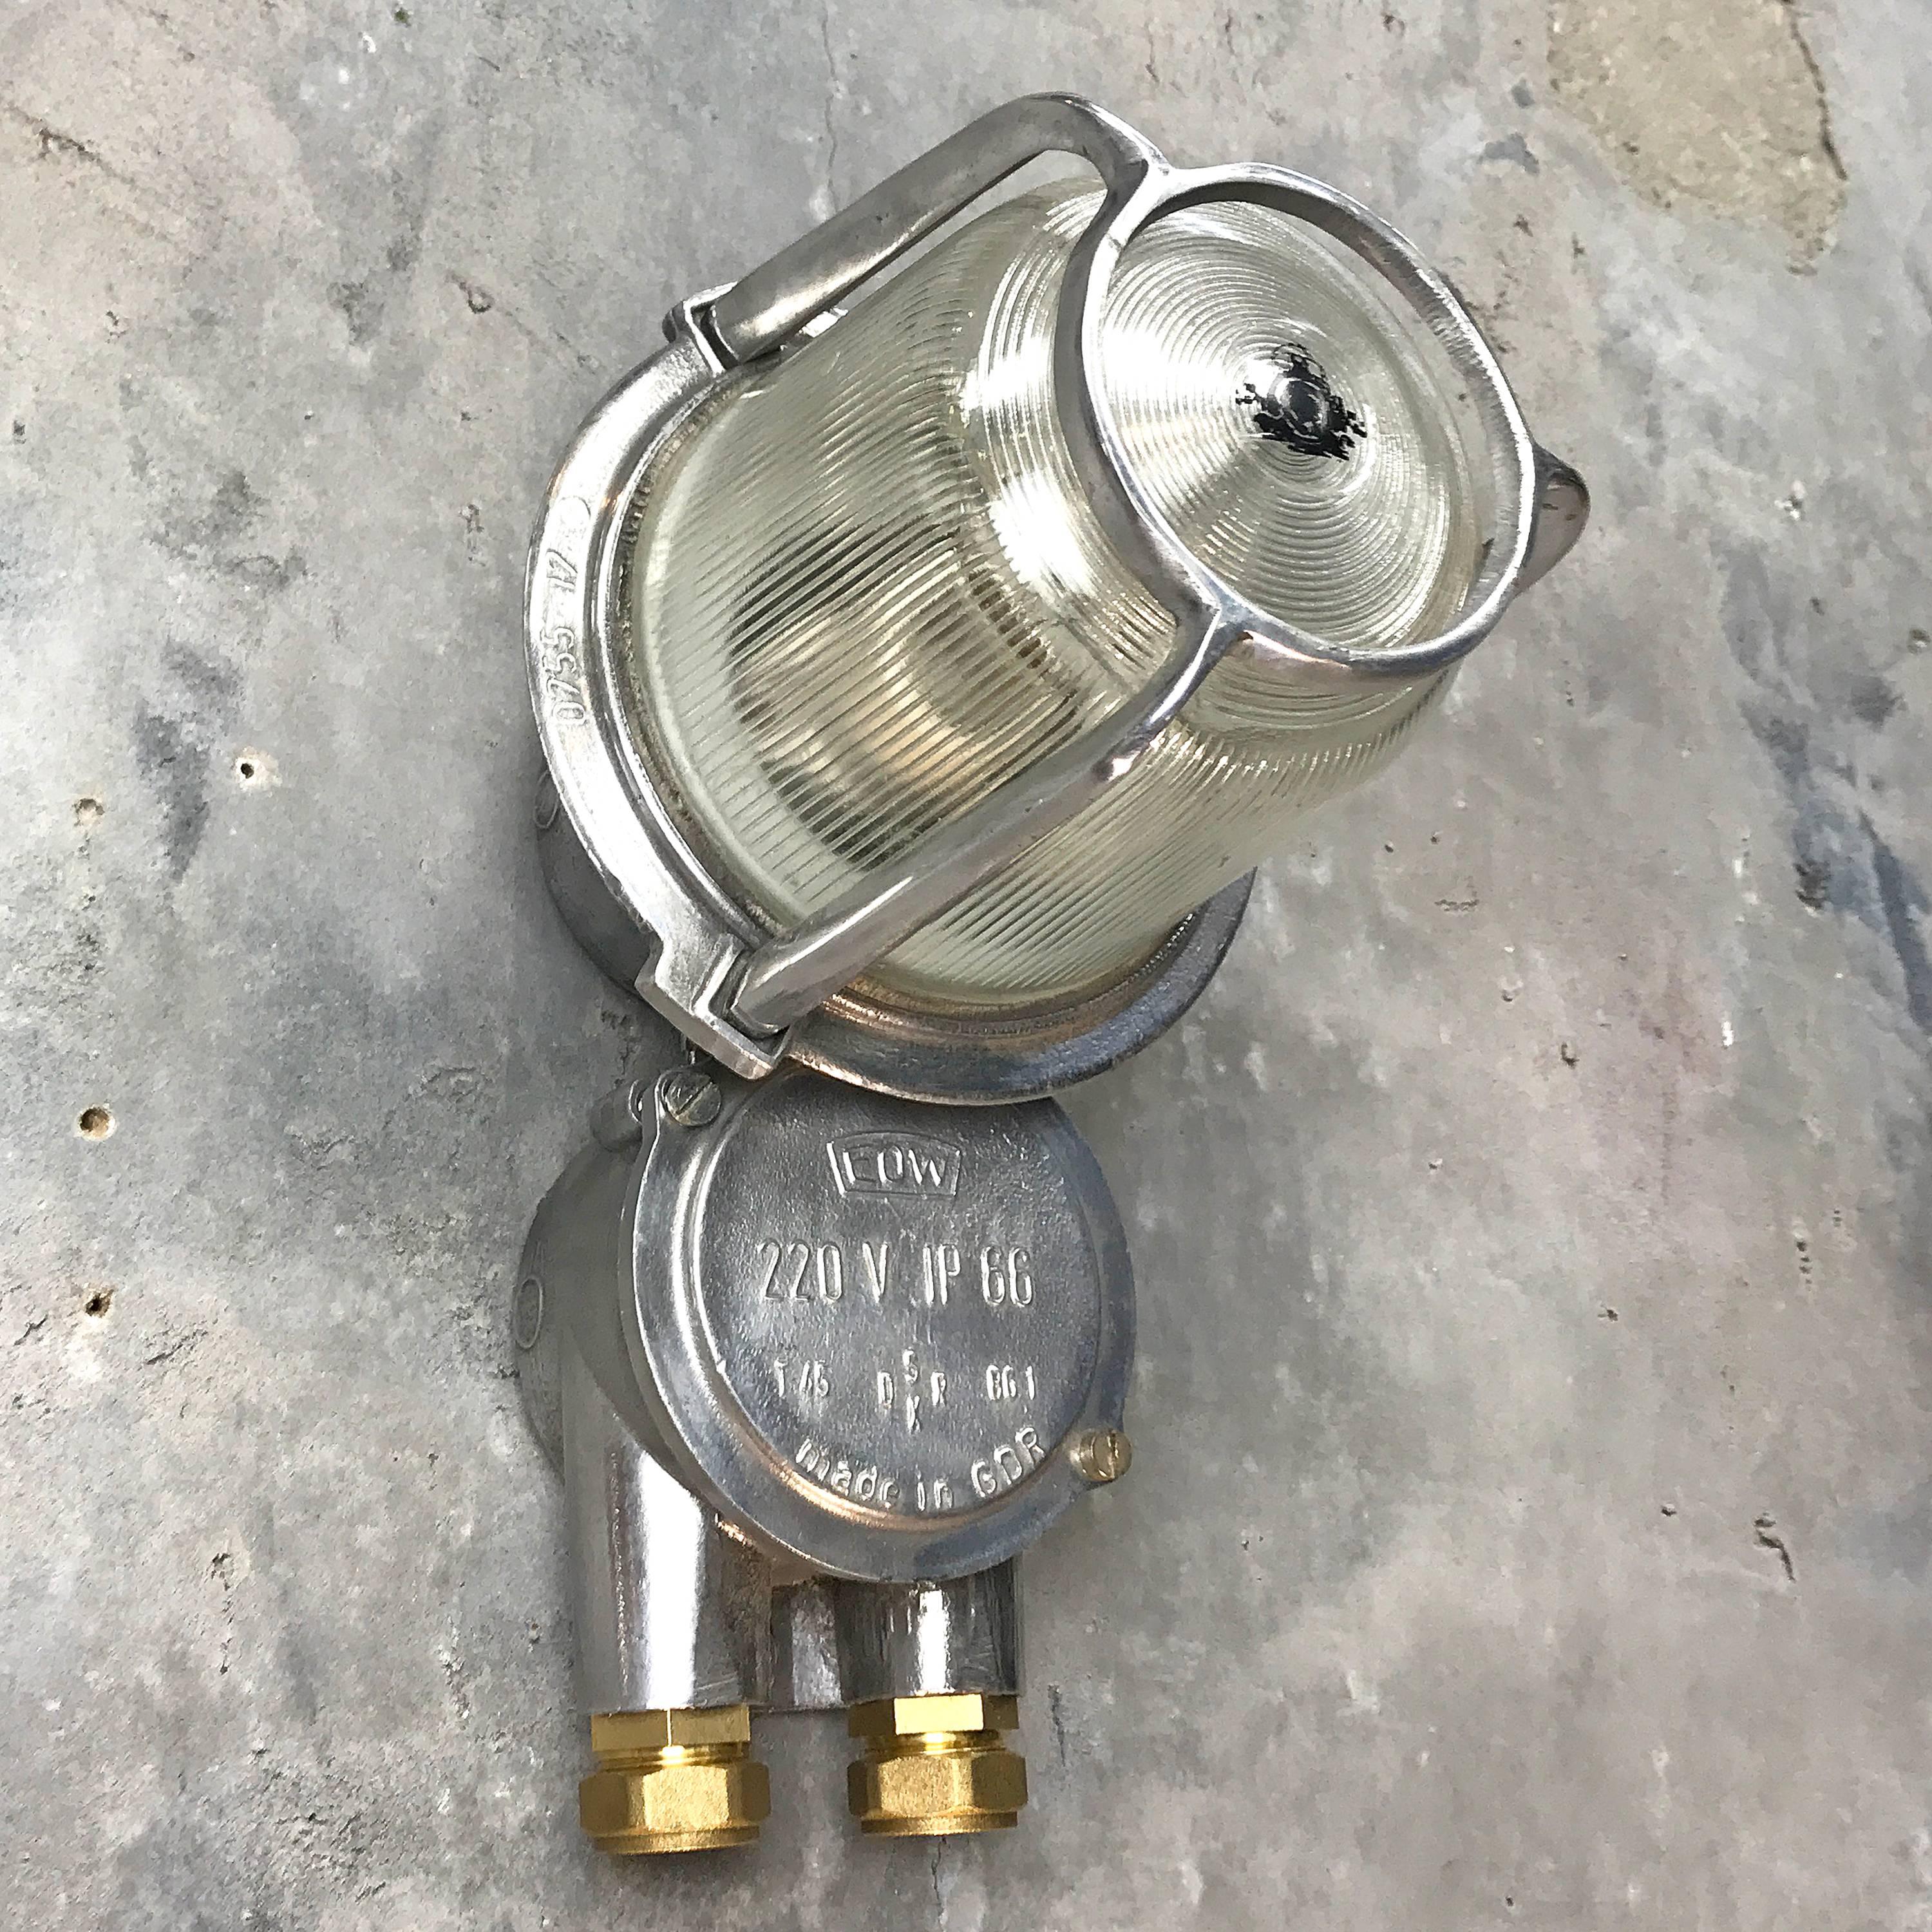 These lights are reclaimed from old super tankers and cargo ships.
The glass is clamped down by the cast frame, the frame and the glass turn and detach to reveal the lamp.
Loomlight has added the brass compression fittings to create a new gland